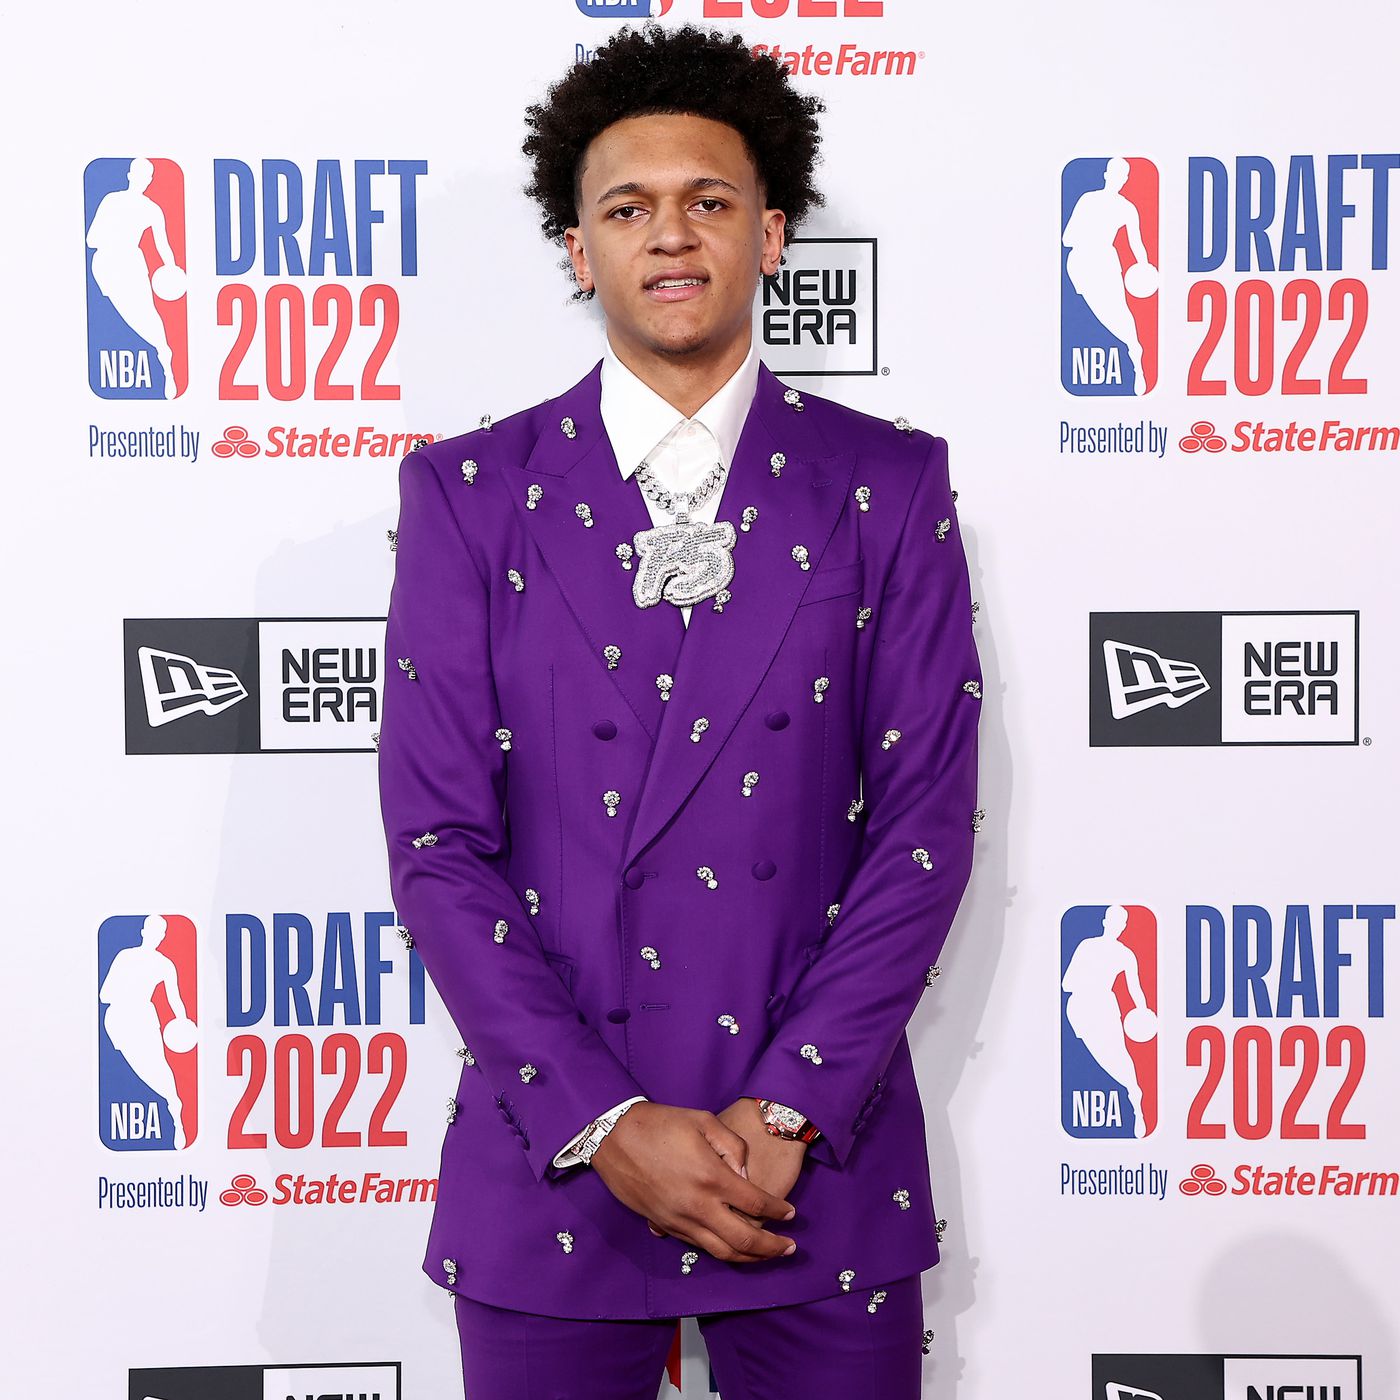 Betting Odds For The Top Pick In The 2022 NBA Draft